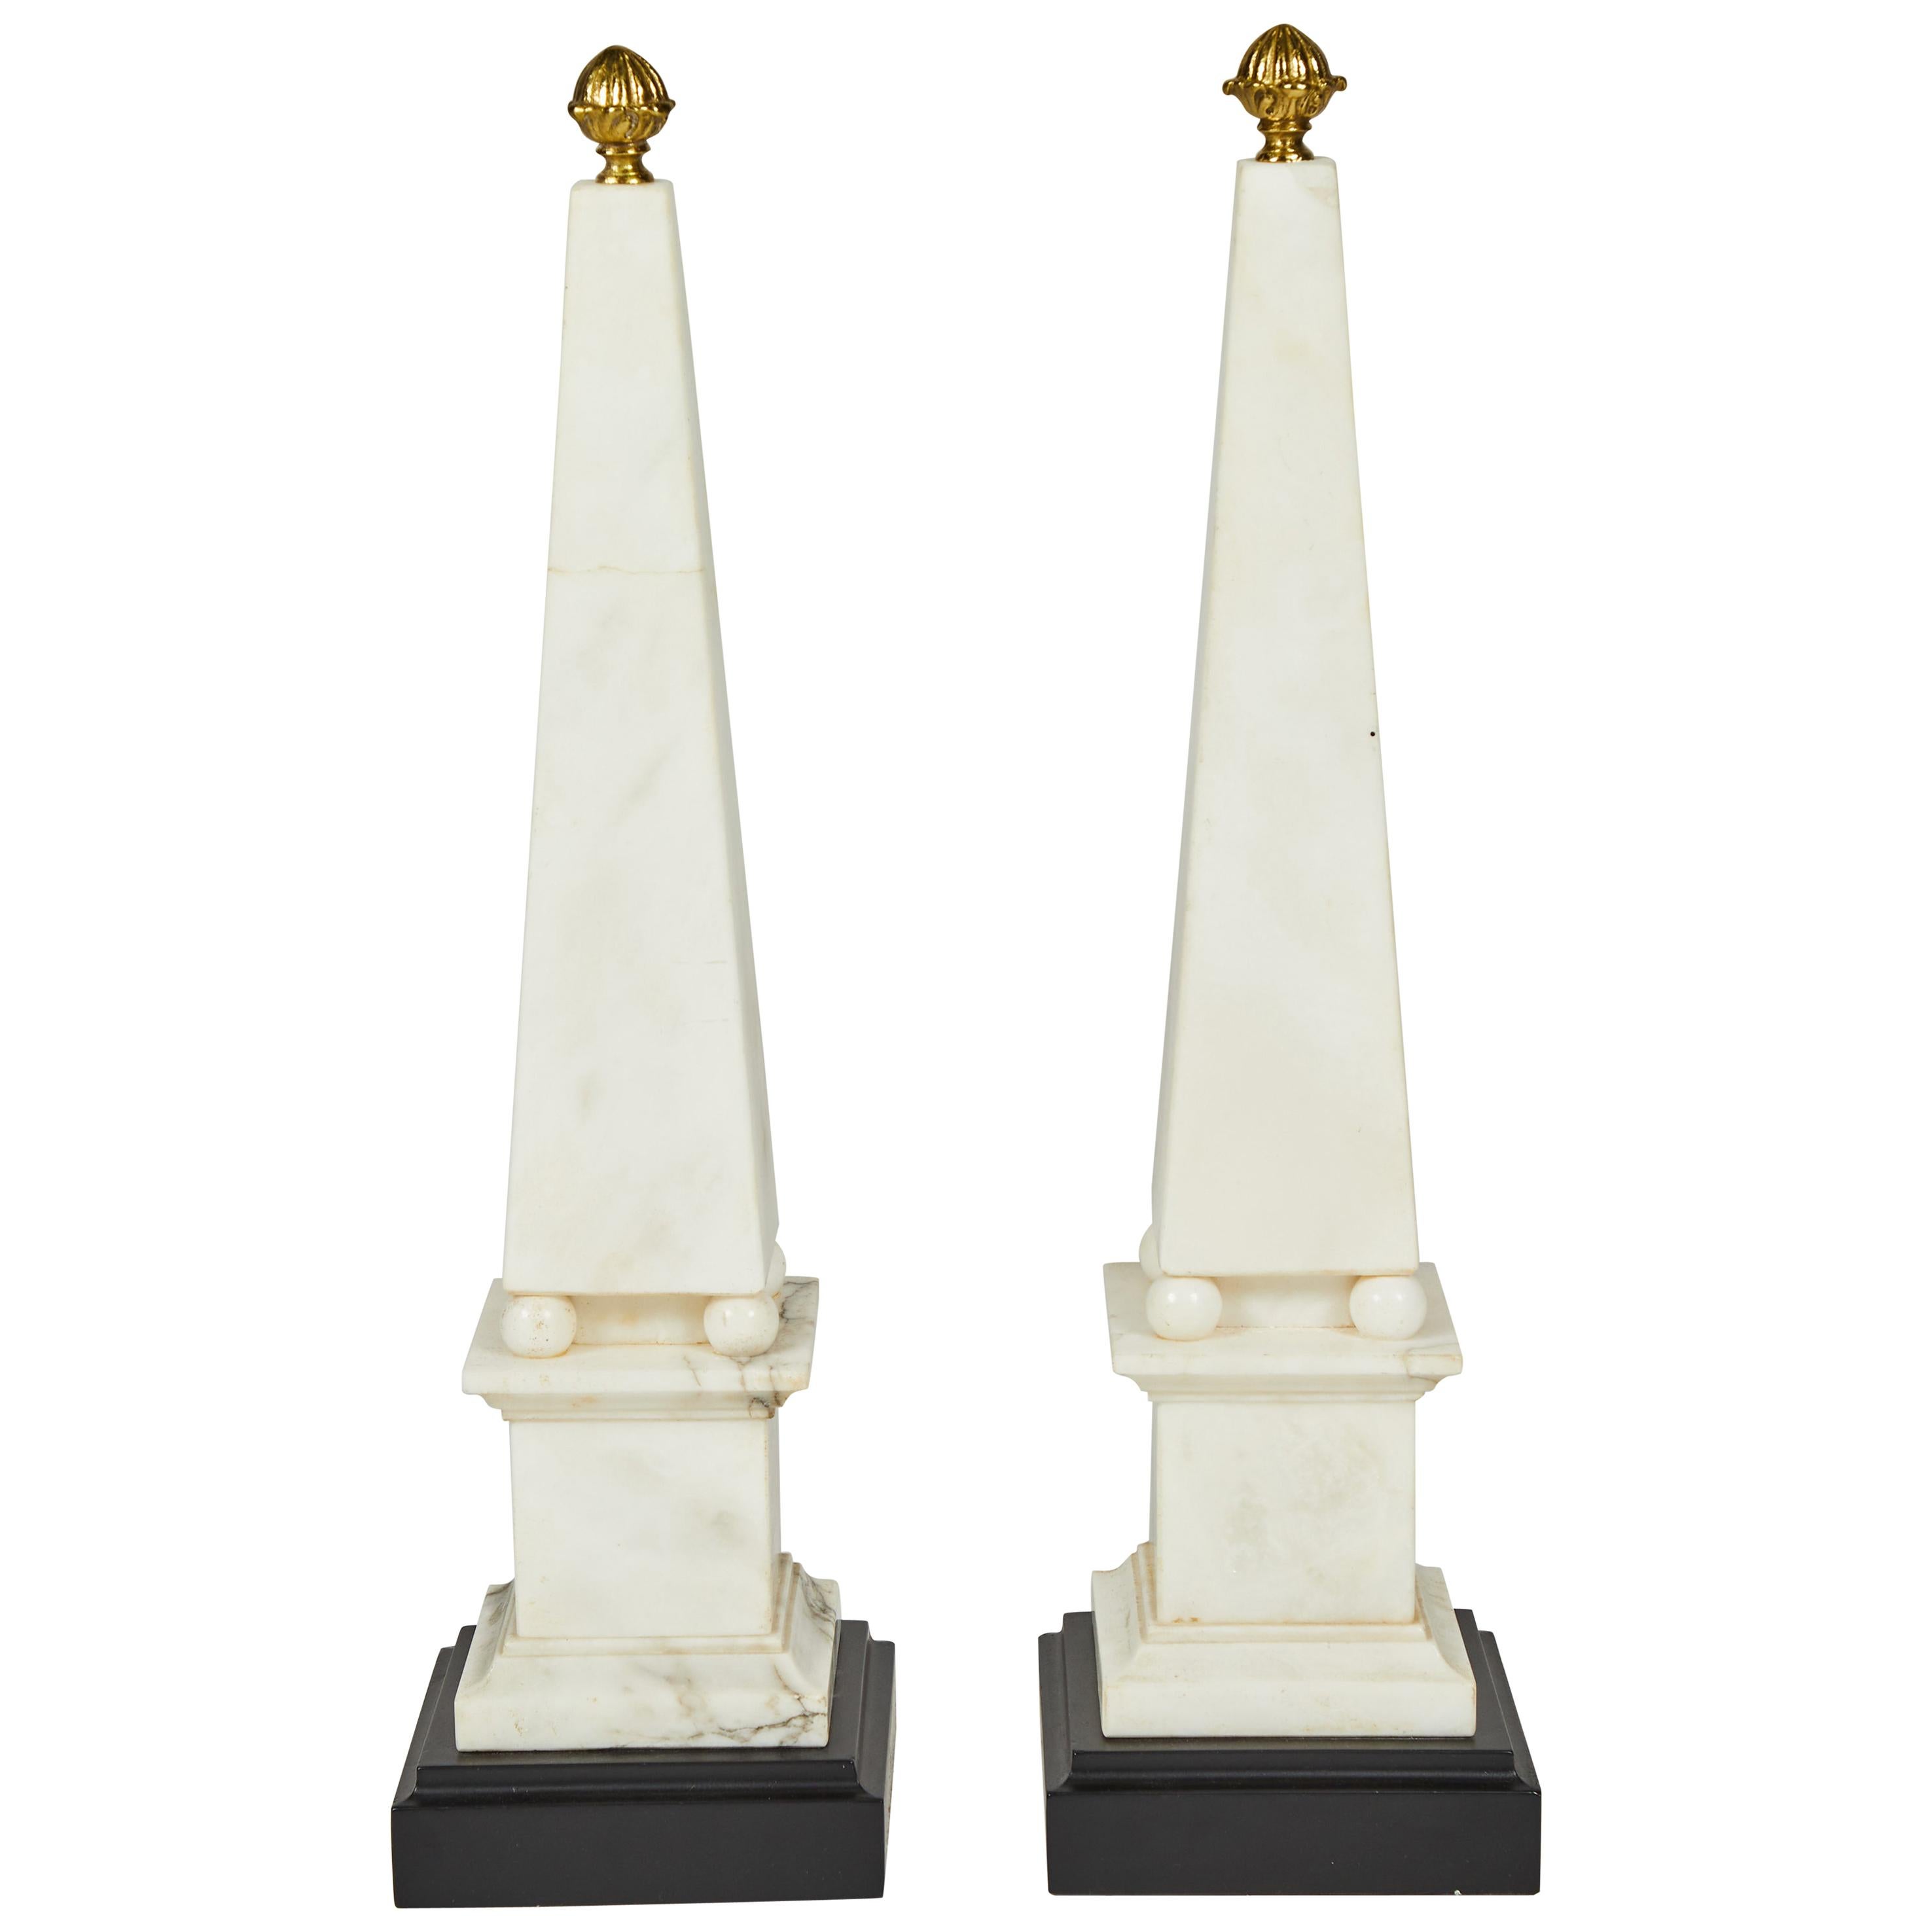 Pair of White Marble Obelisks on Painted Wood Bases with Brass Acorn Finials For Sale